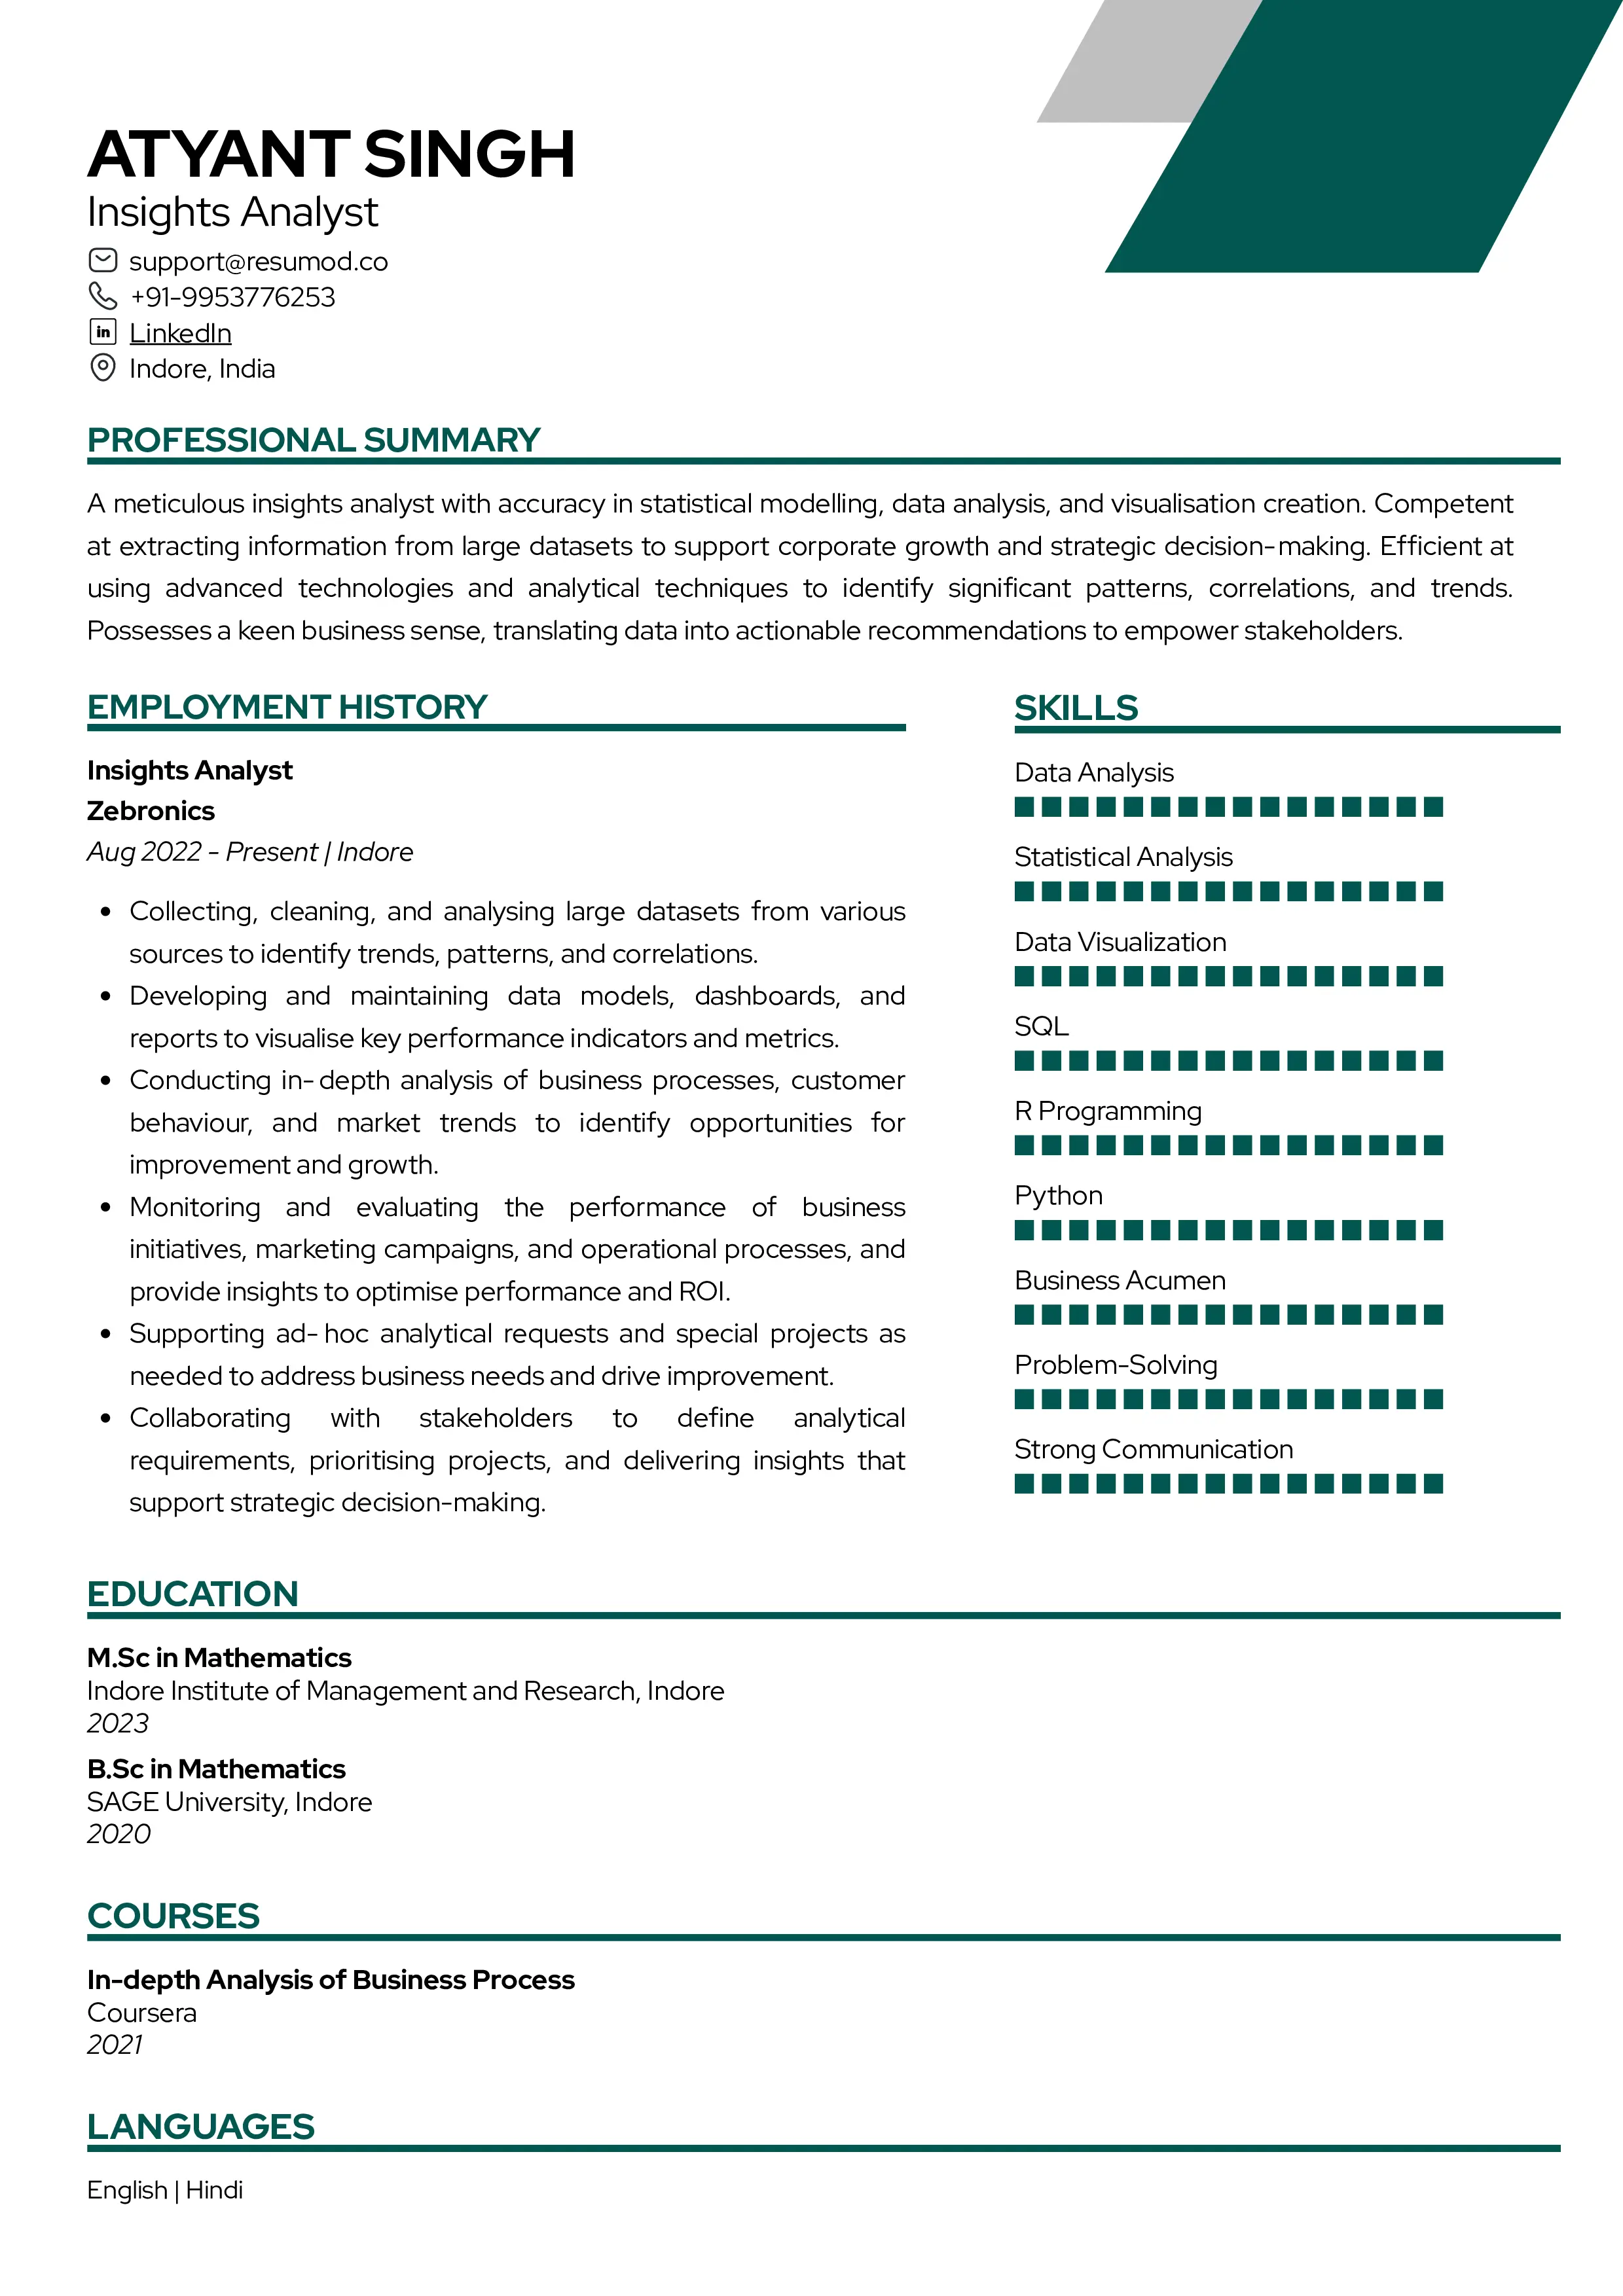 Sample Resume of Content Insights Analyst | Free Resume Templates & Samples on Resumod.co